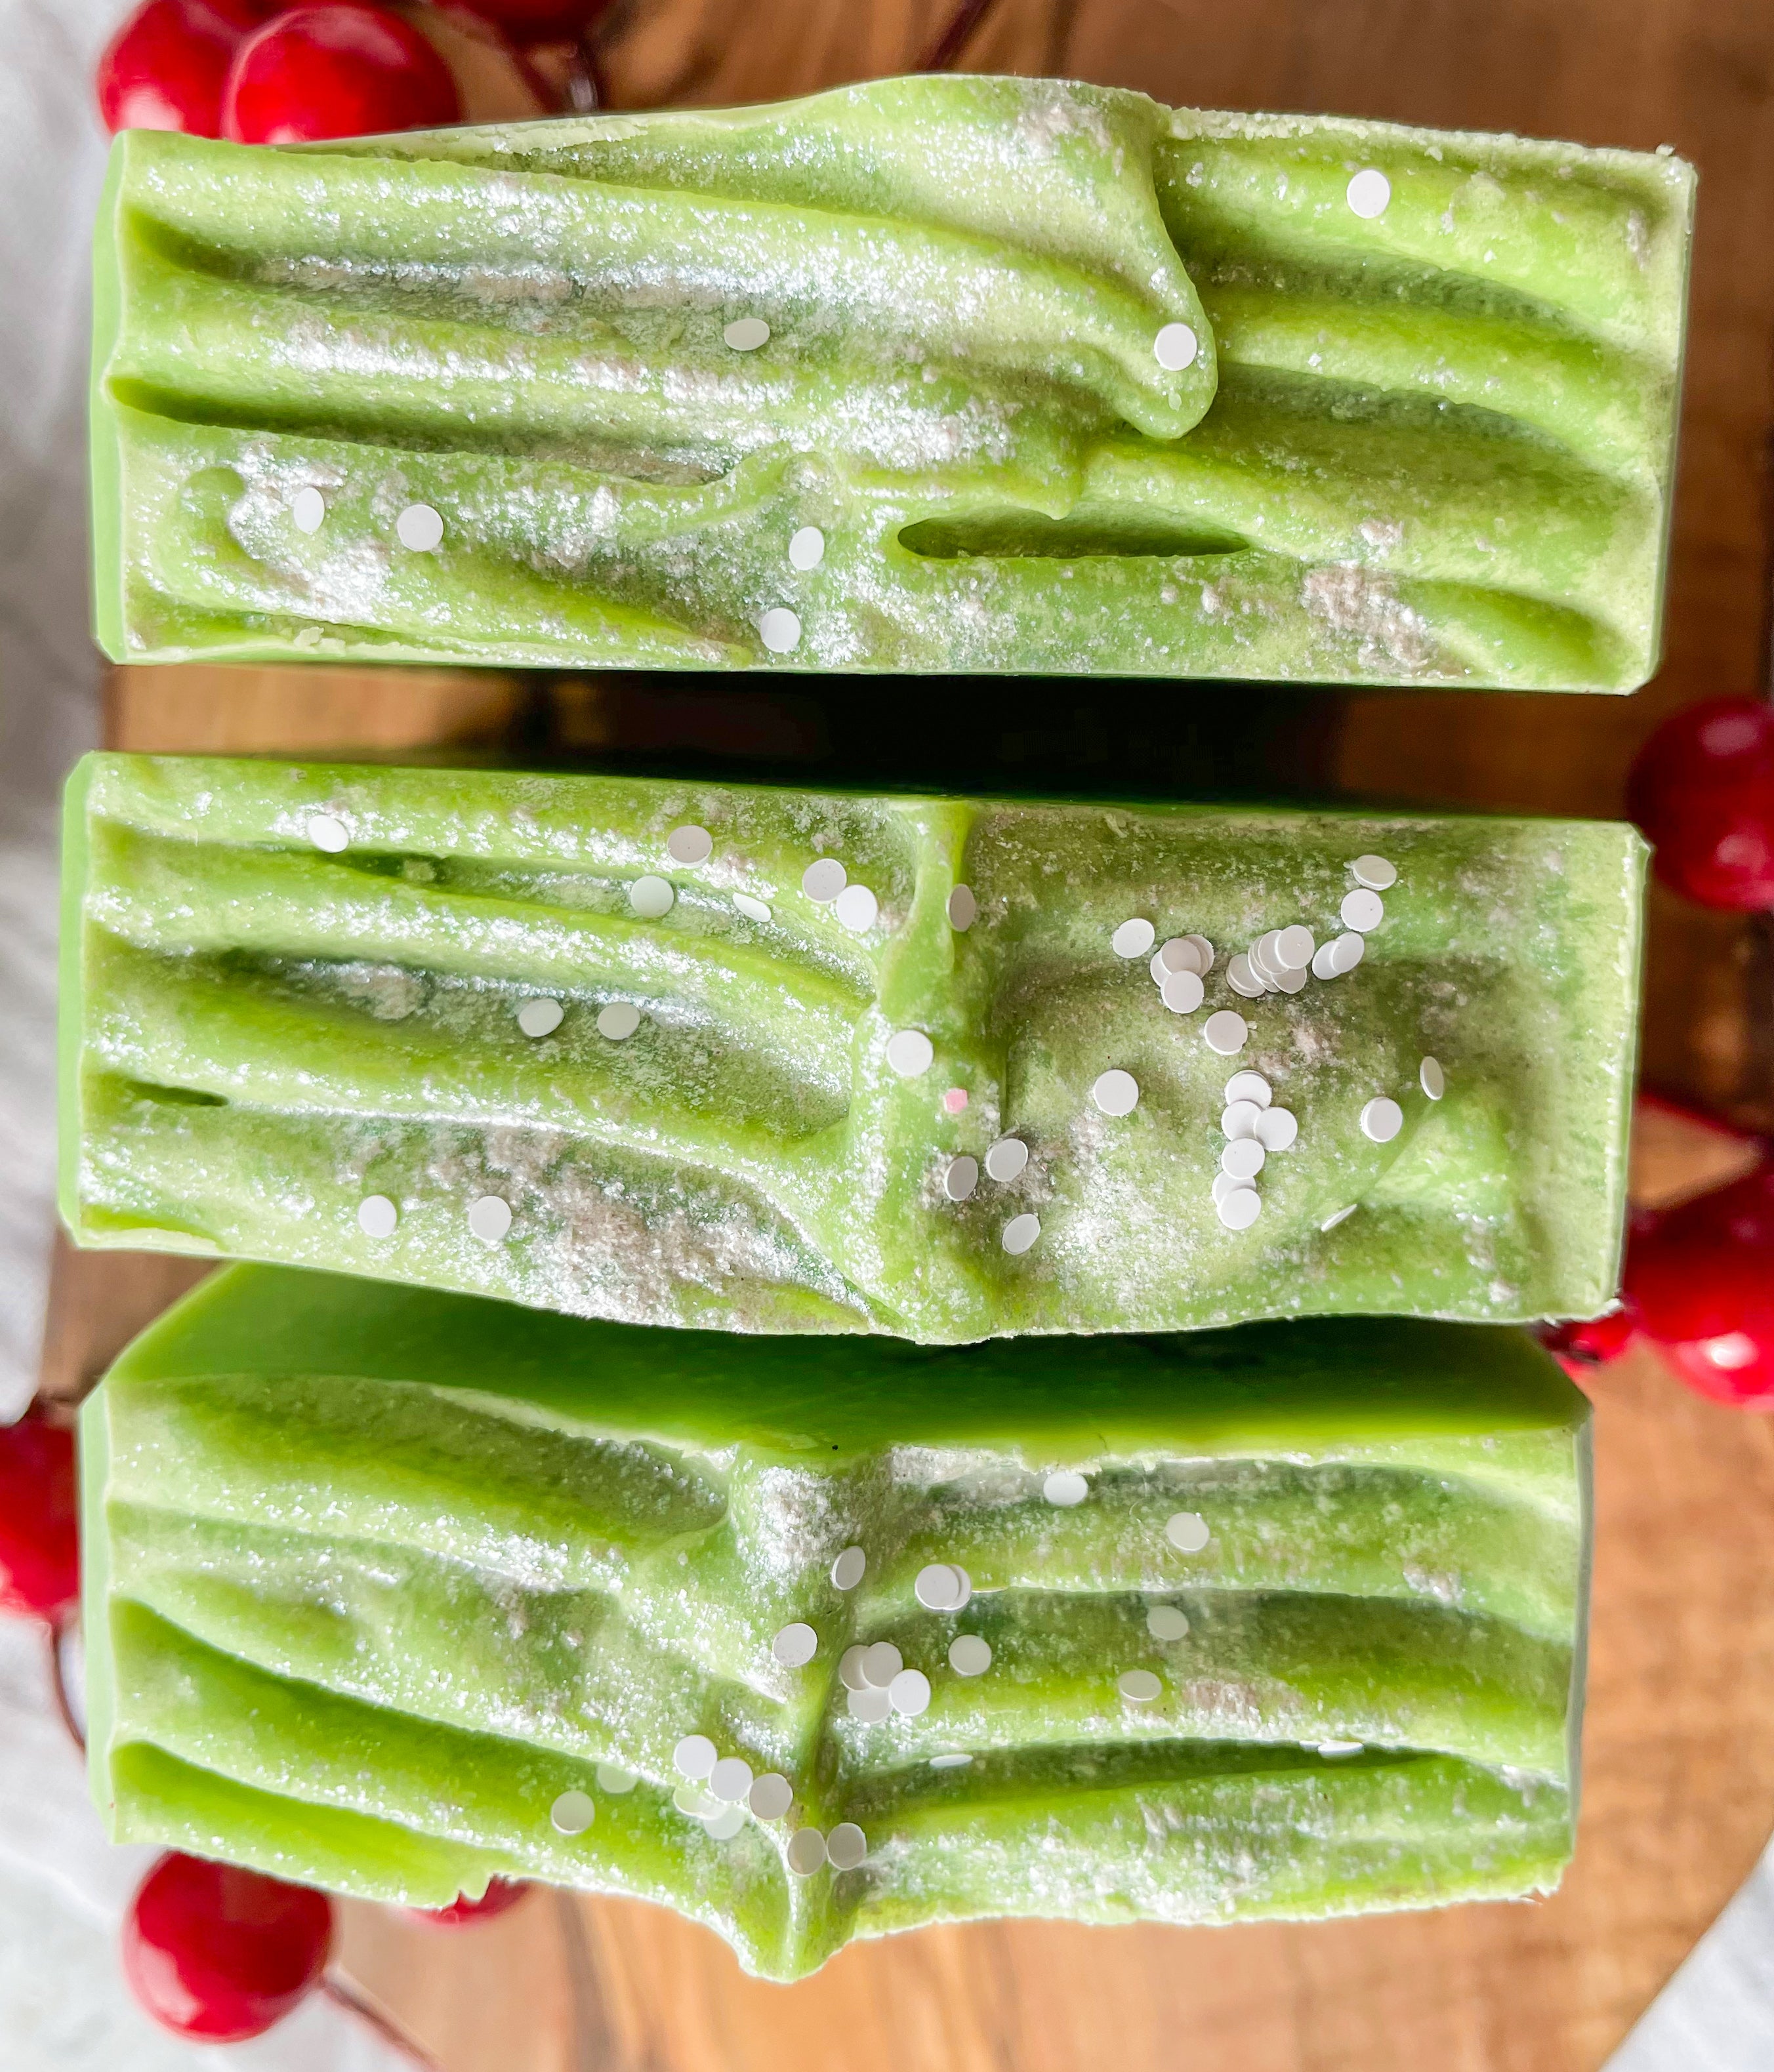 "The Grinch" Guest Sized Soap